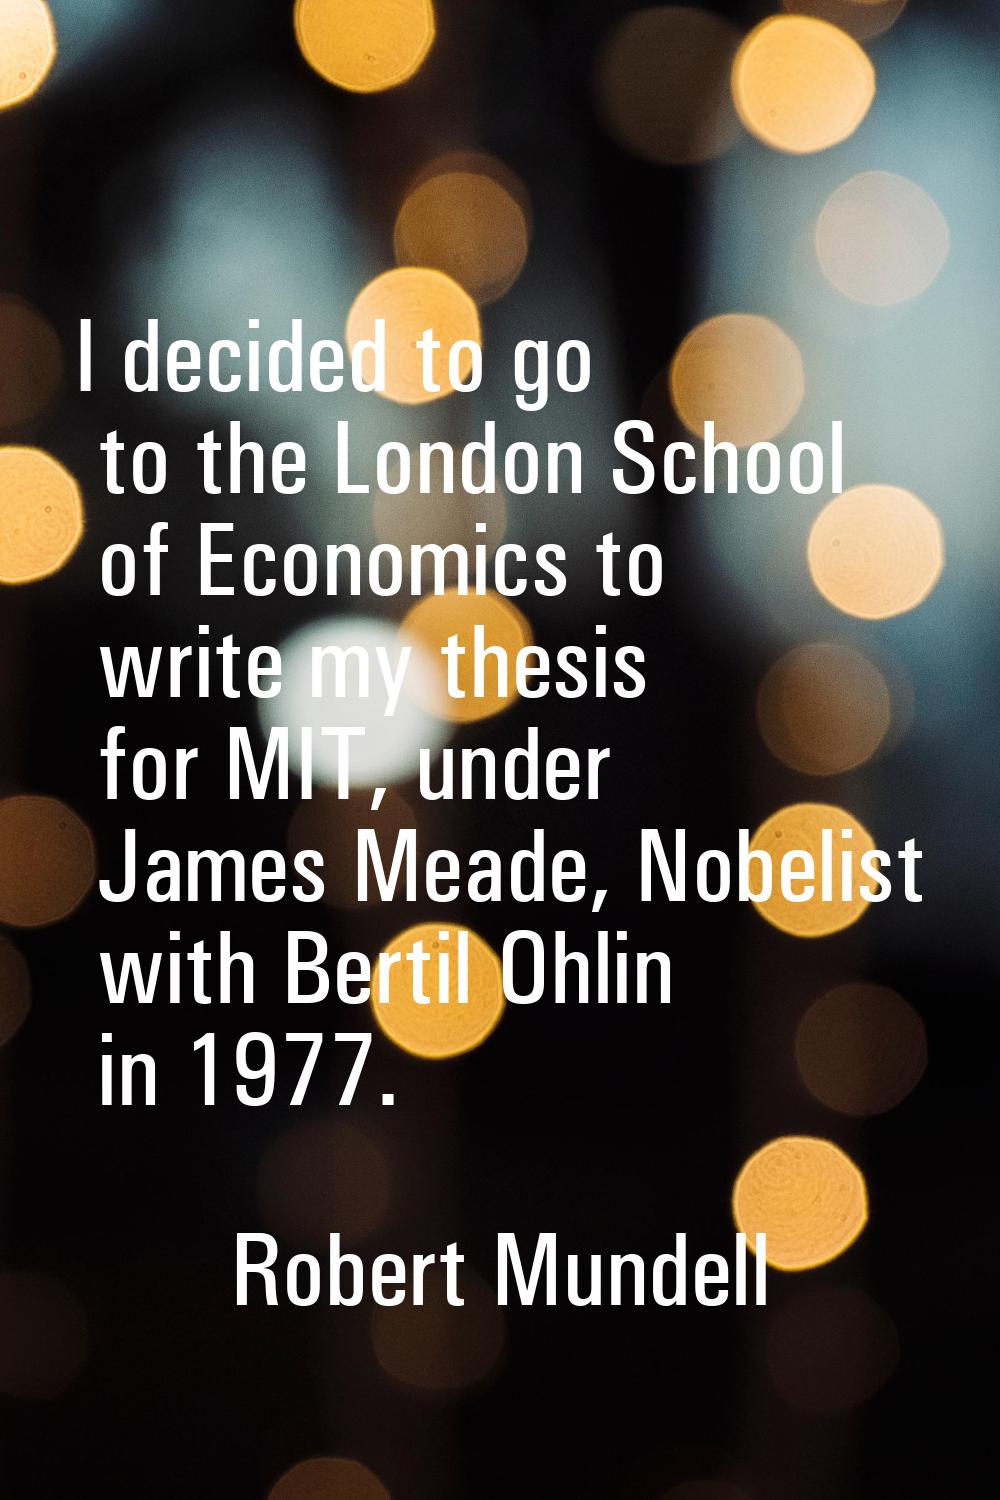 I decided to go to the London School of Economics to write my thesis for MIT, under James Meade, No